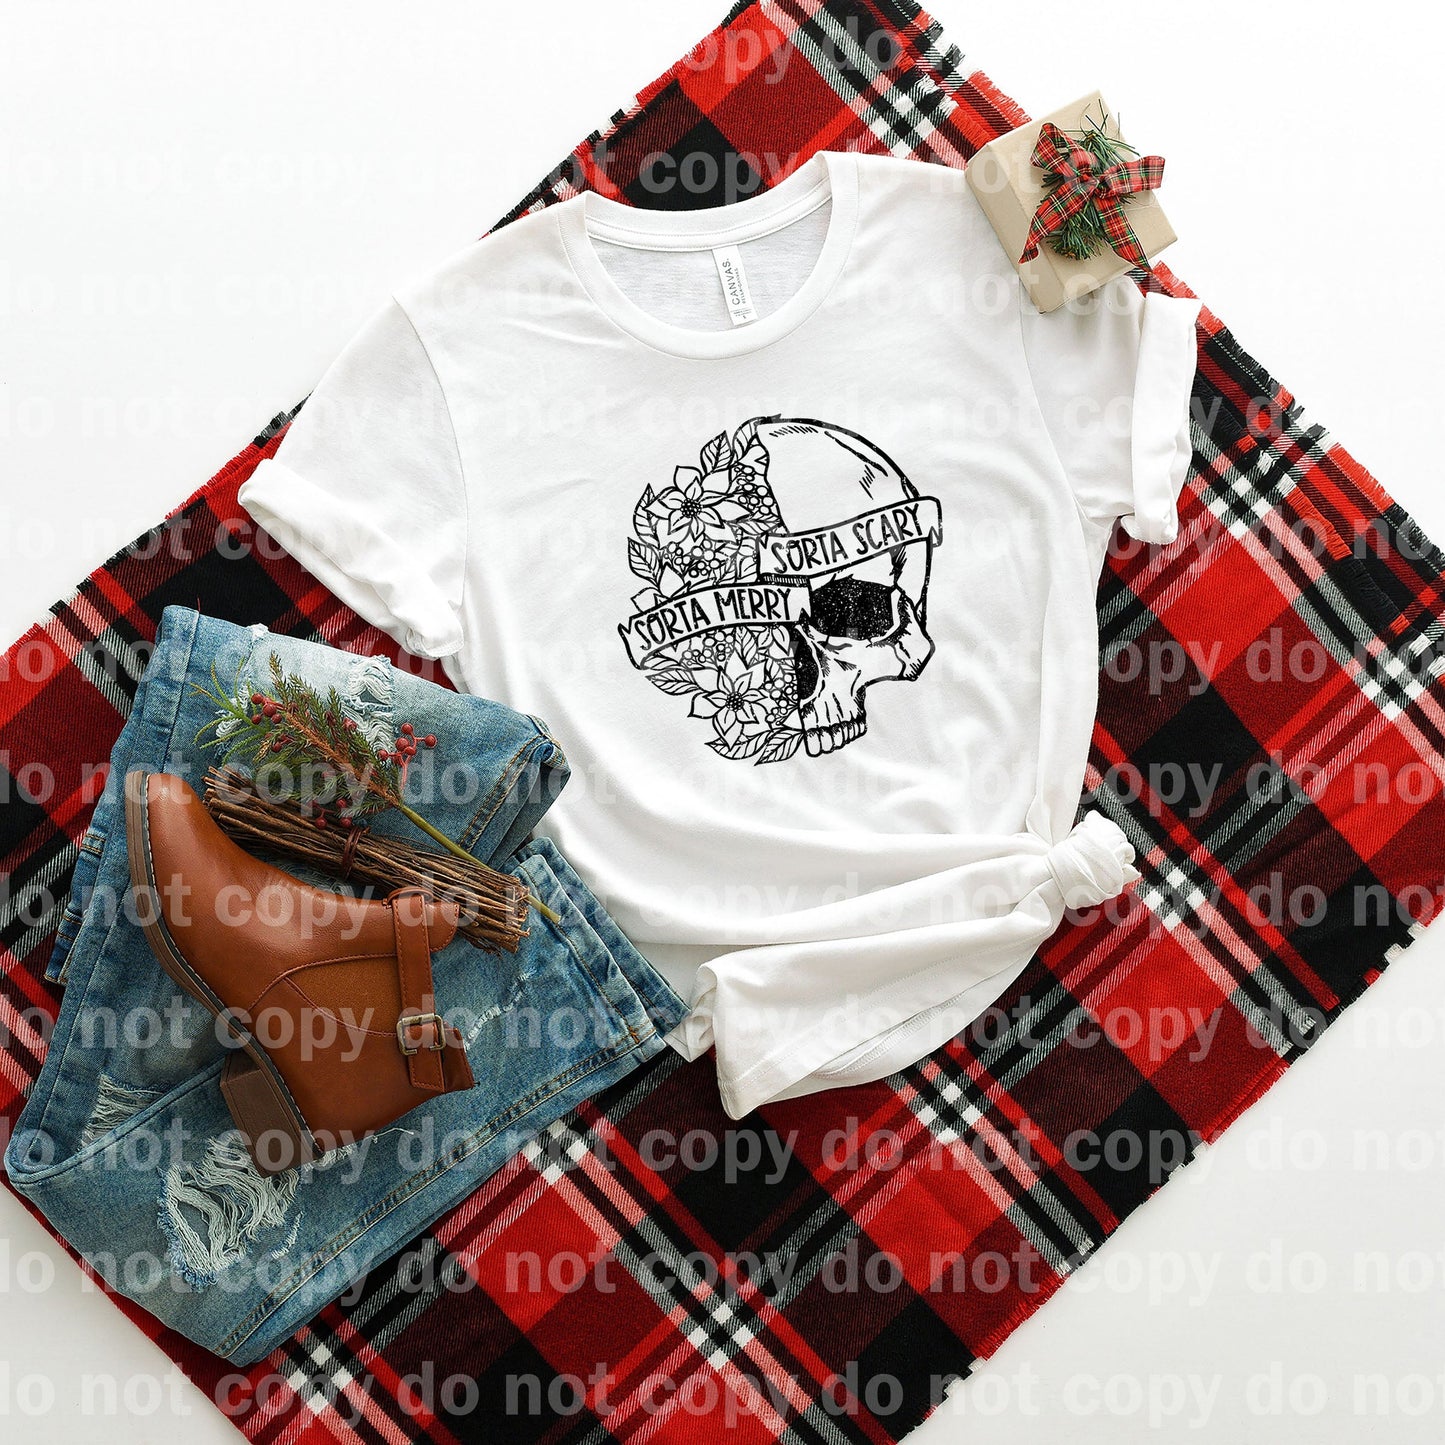 Sorta Merry Sorta Scary Distressed Full Color/One Color Dream Print or Sublimation Print